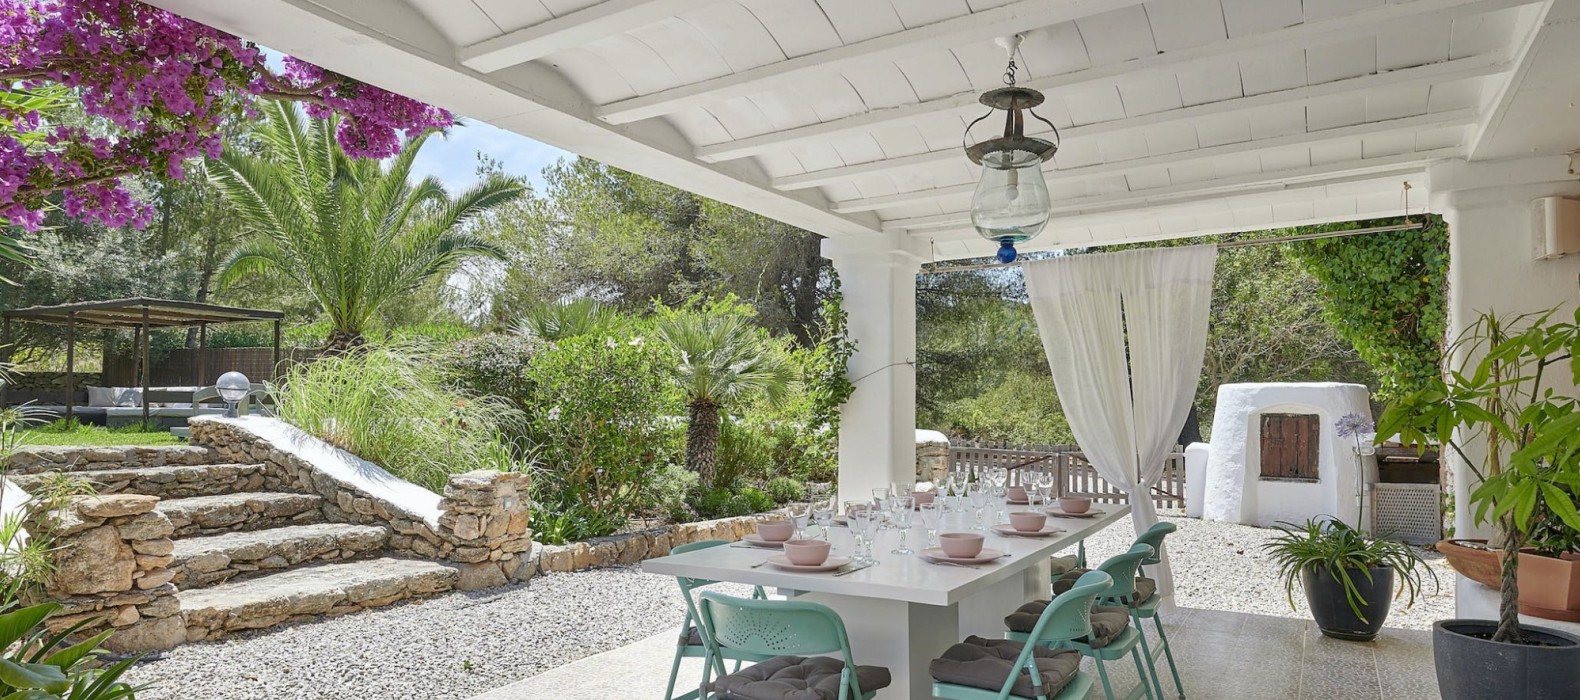 Exterior dining area of Finca Traditionale in Ibiza